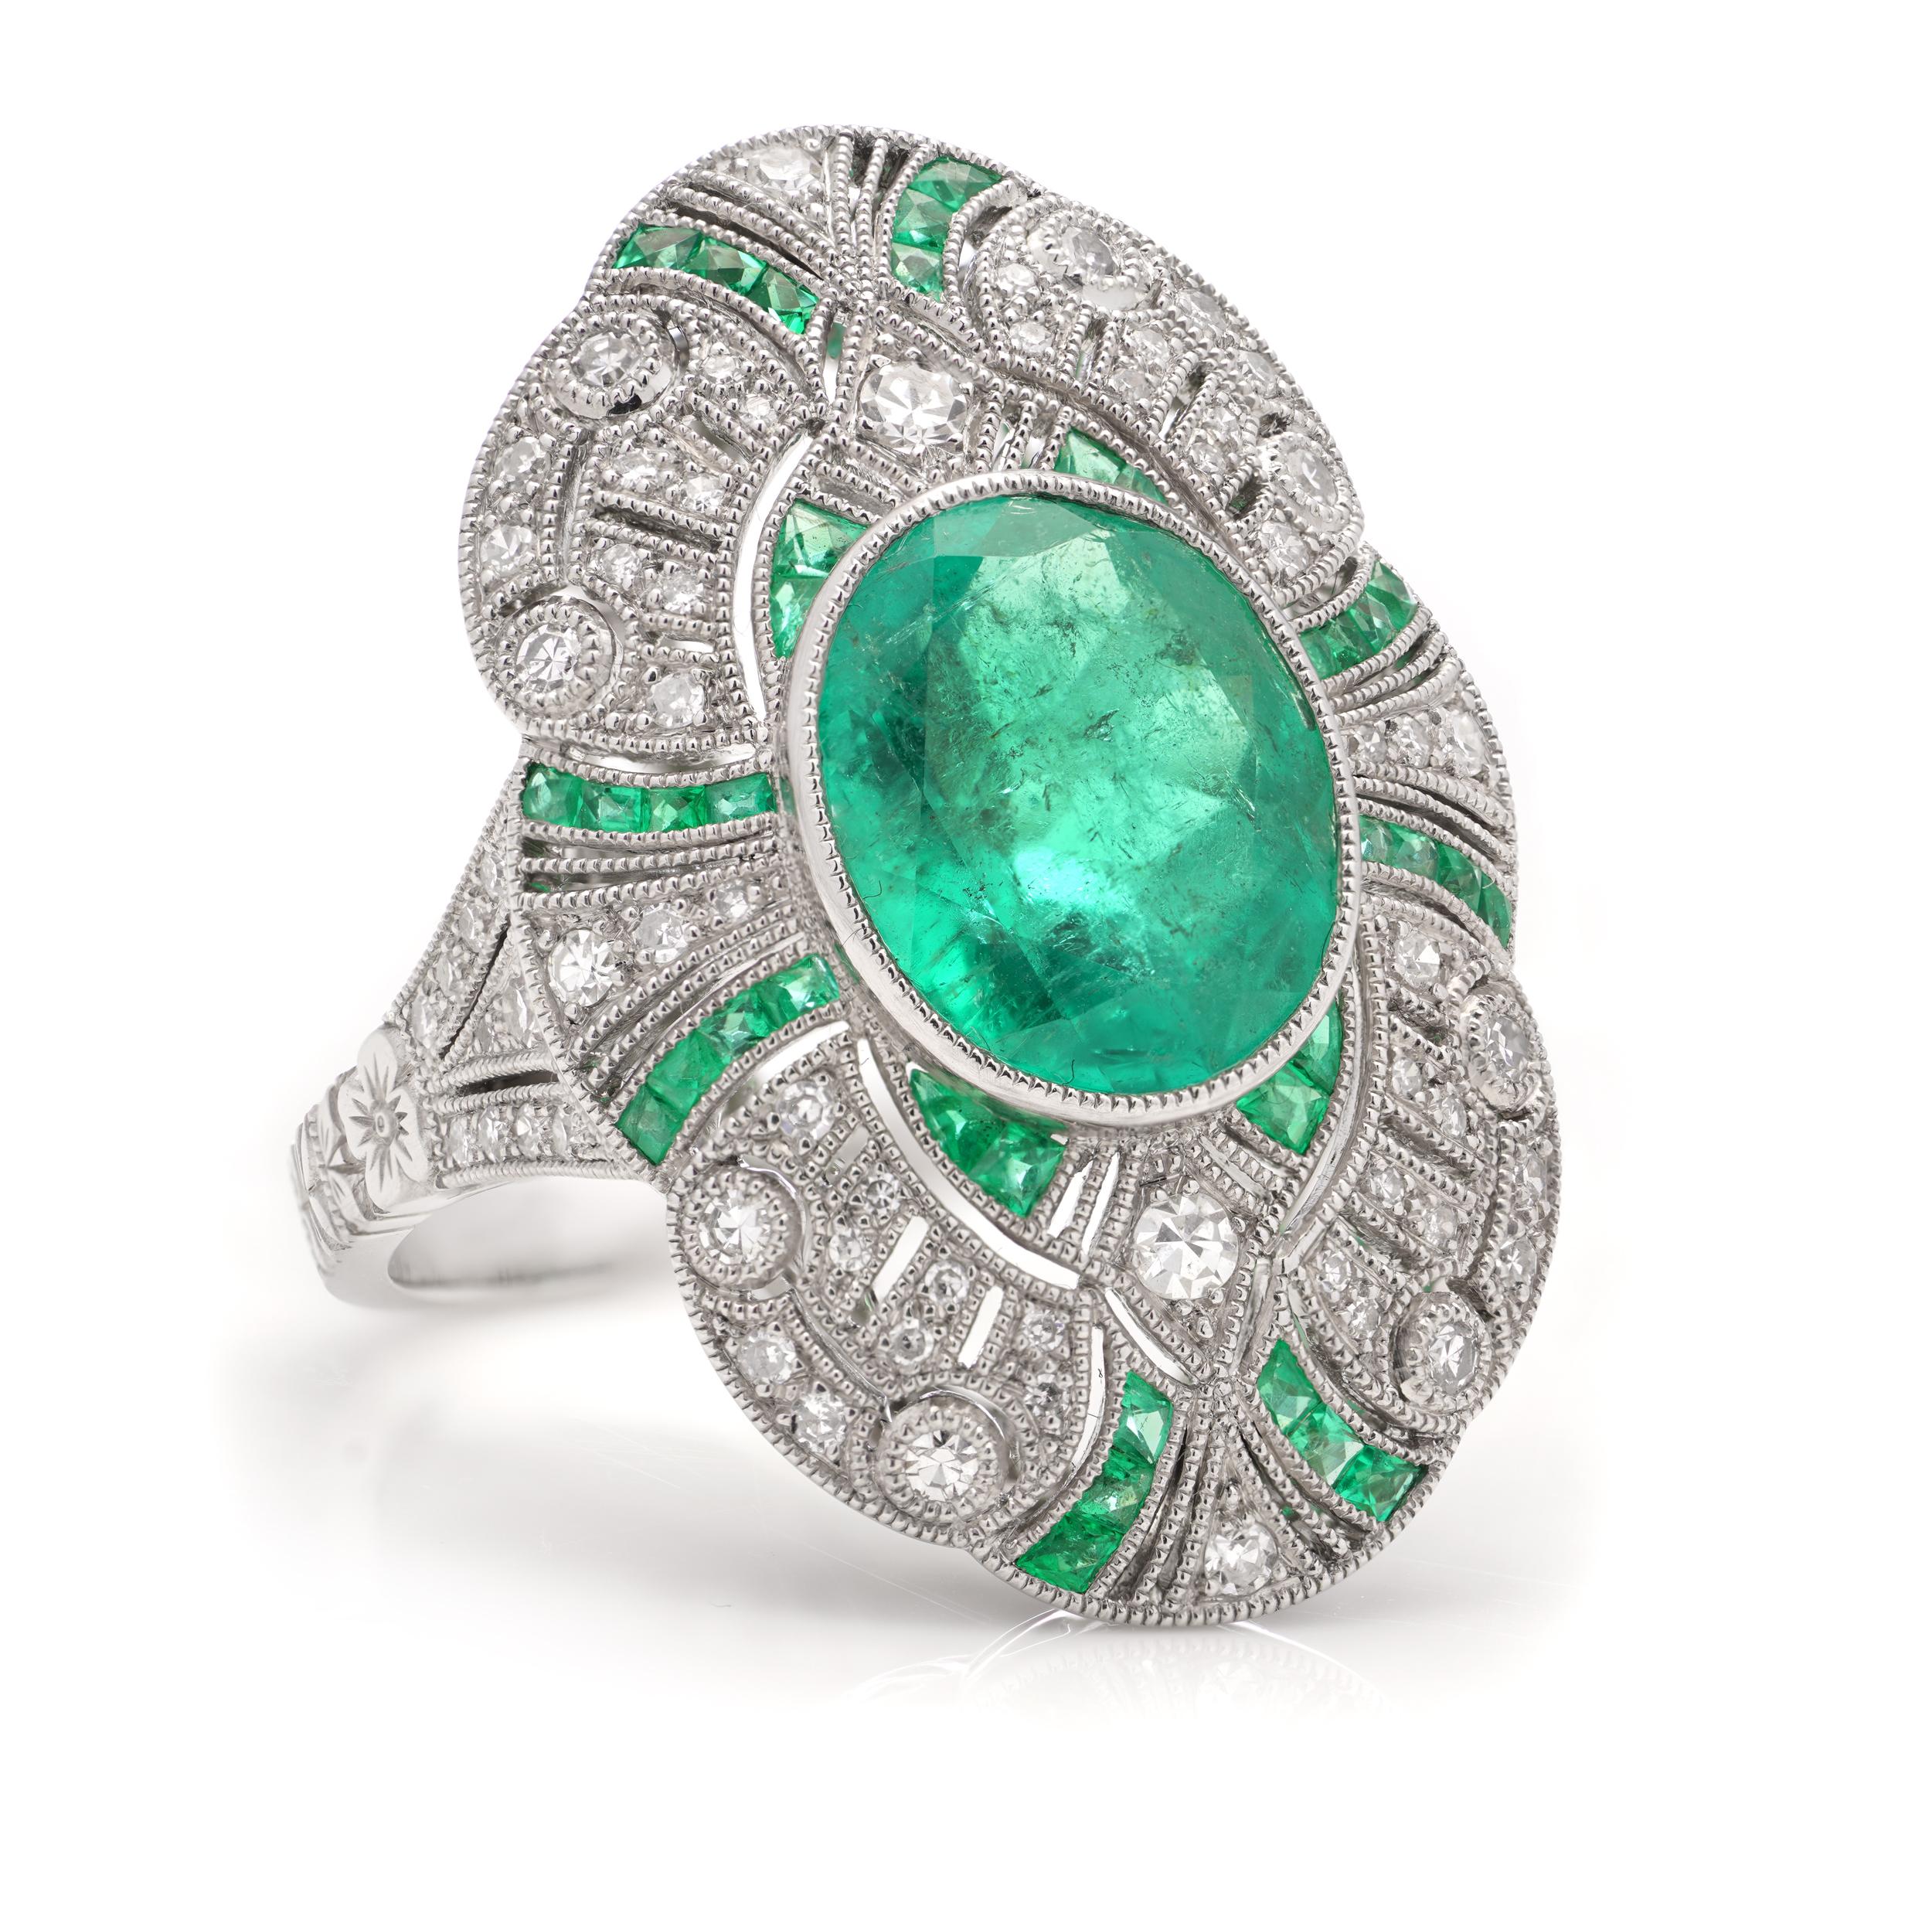 Platinum Art Deco-inspired 3.62 carats of Emerald fashion ring For Sale 5